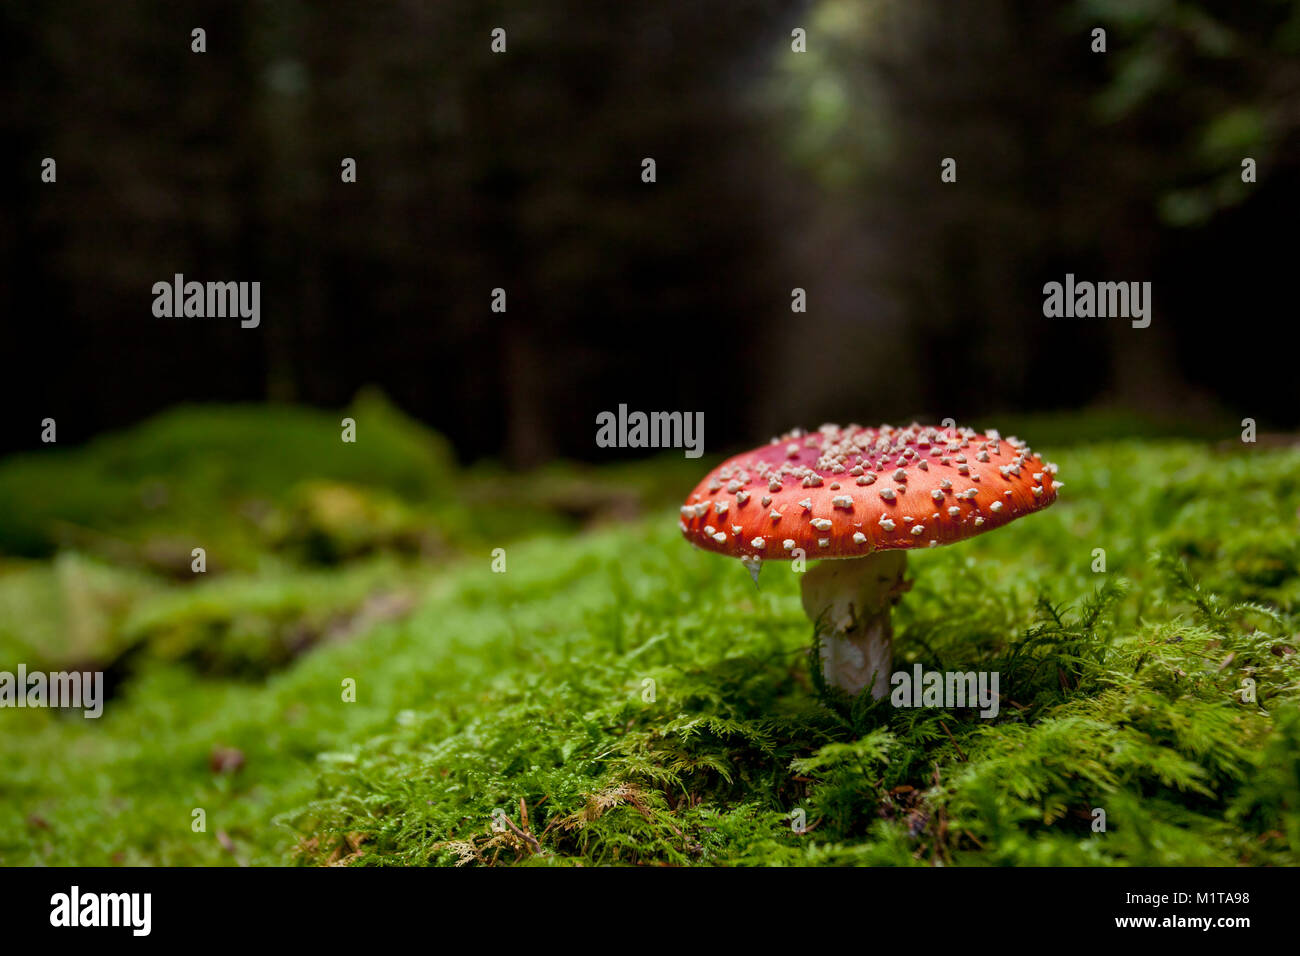 Agaric Fly champignons (Amanita muscaria) croissant dans les bois. Dundrum, Tipperary, Irlande. Banque D'Images